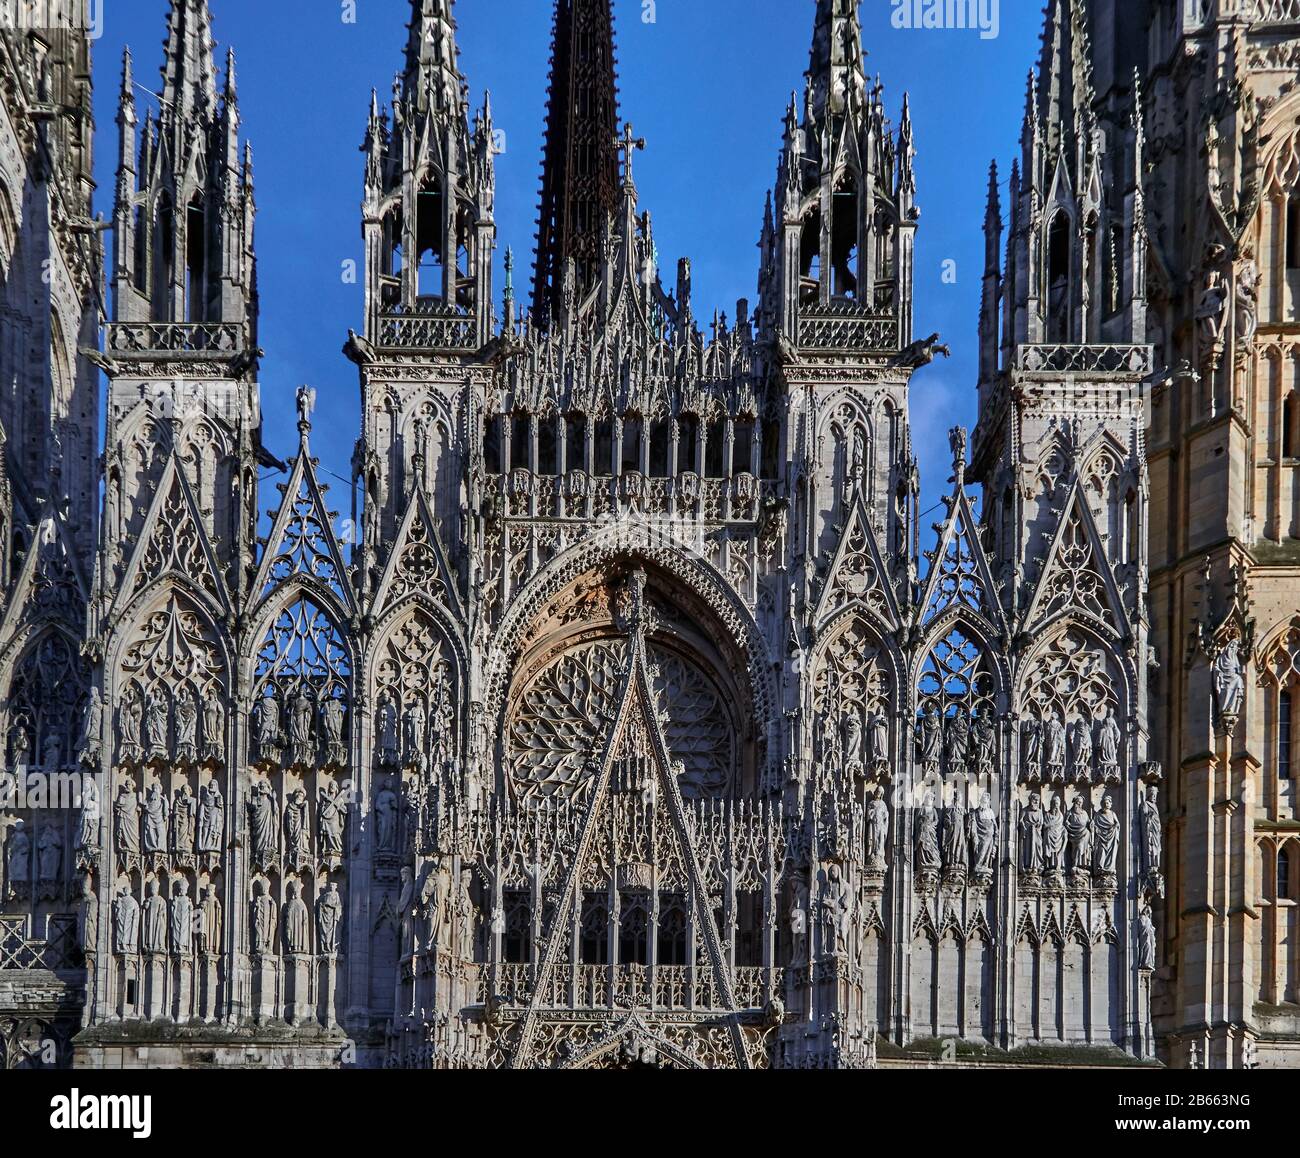 the Rouen Cathedral – known as Notre-Dame de l'Assomption de Rouen is a Roman Catholic church , The magnificent Gothic cathedral of Rouen has the highest church spire in France and a wealth of art, history and architectural details Stock Photo